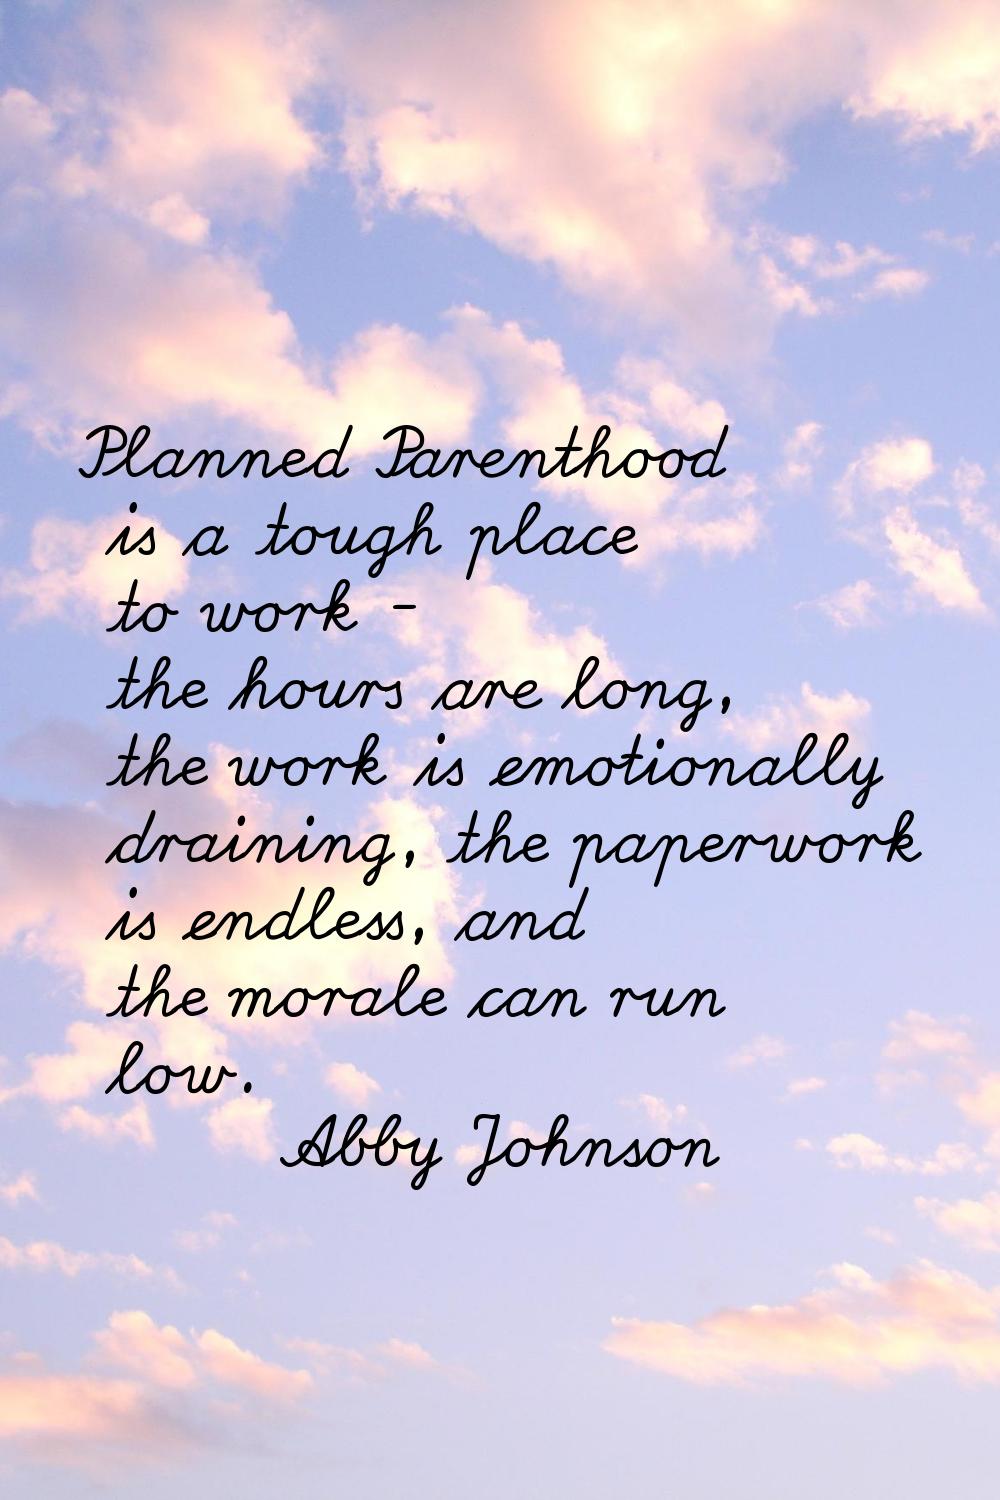 Planned Parenthood is a tough place to work - the hours are long, the work is emotionally draining,